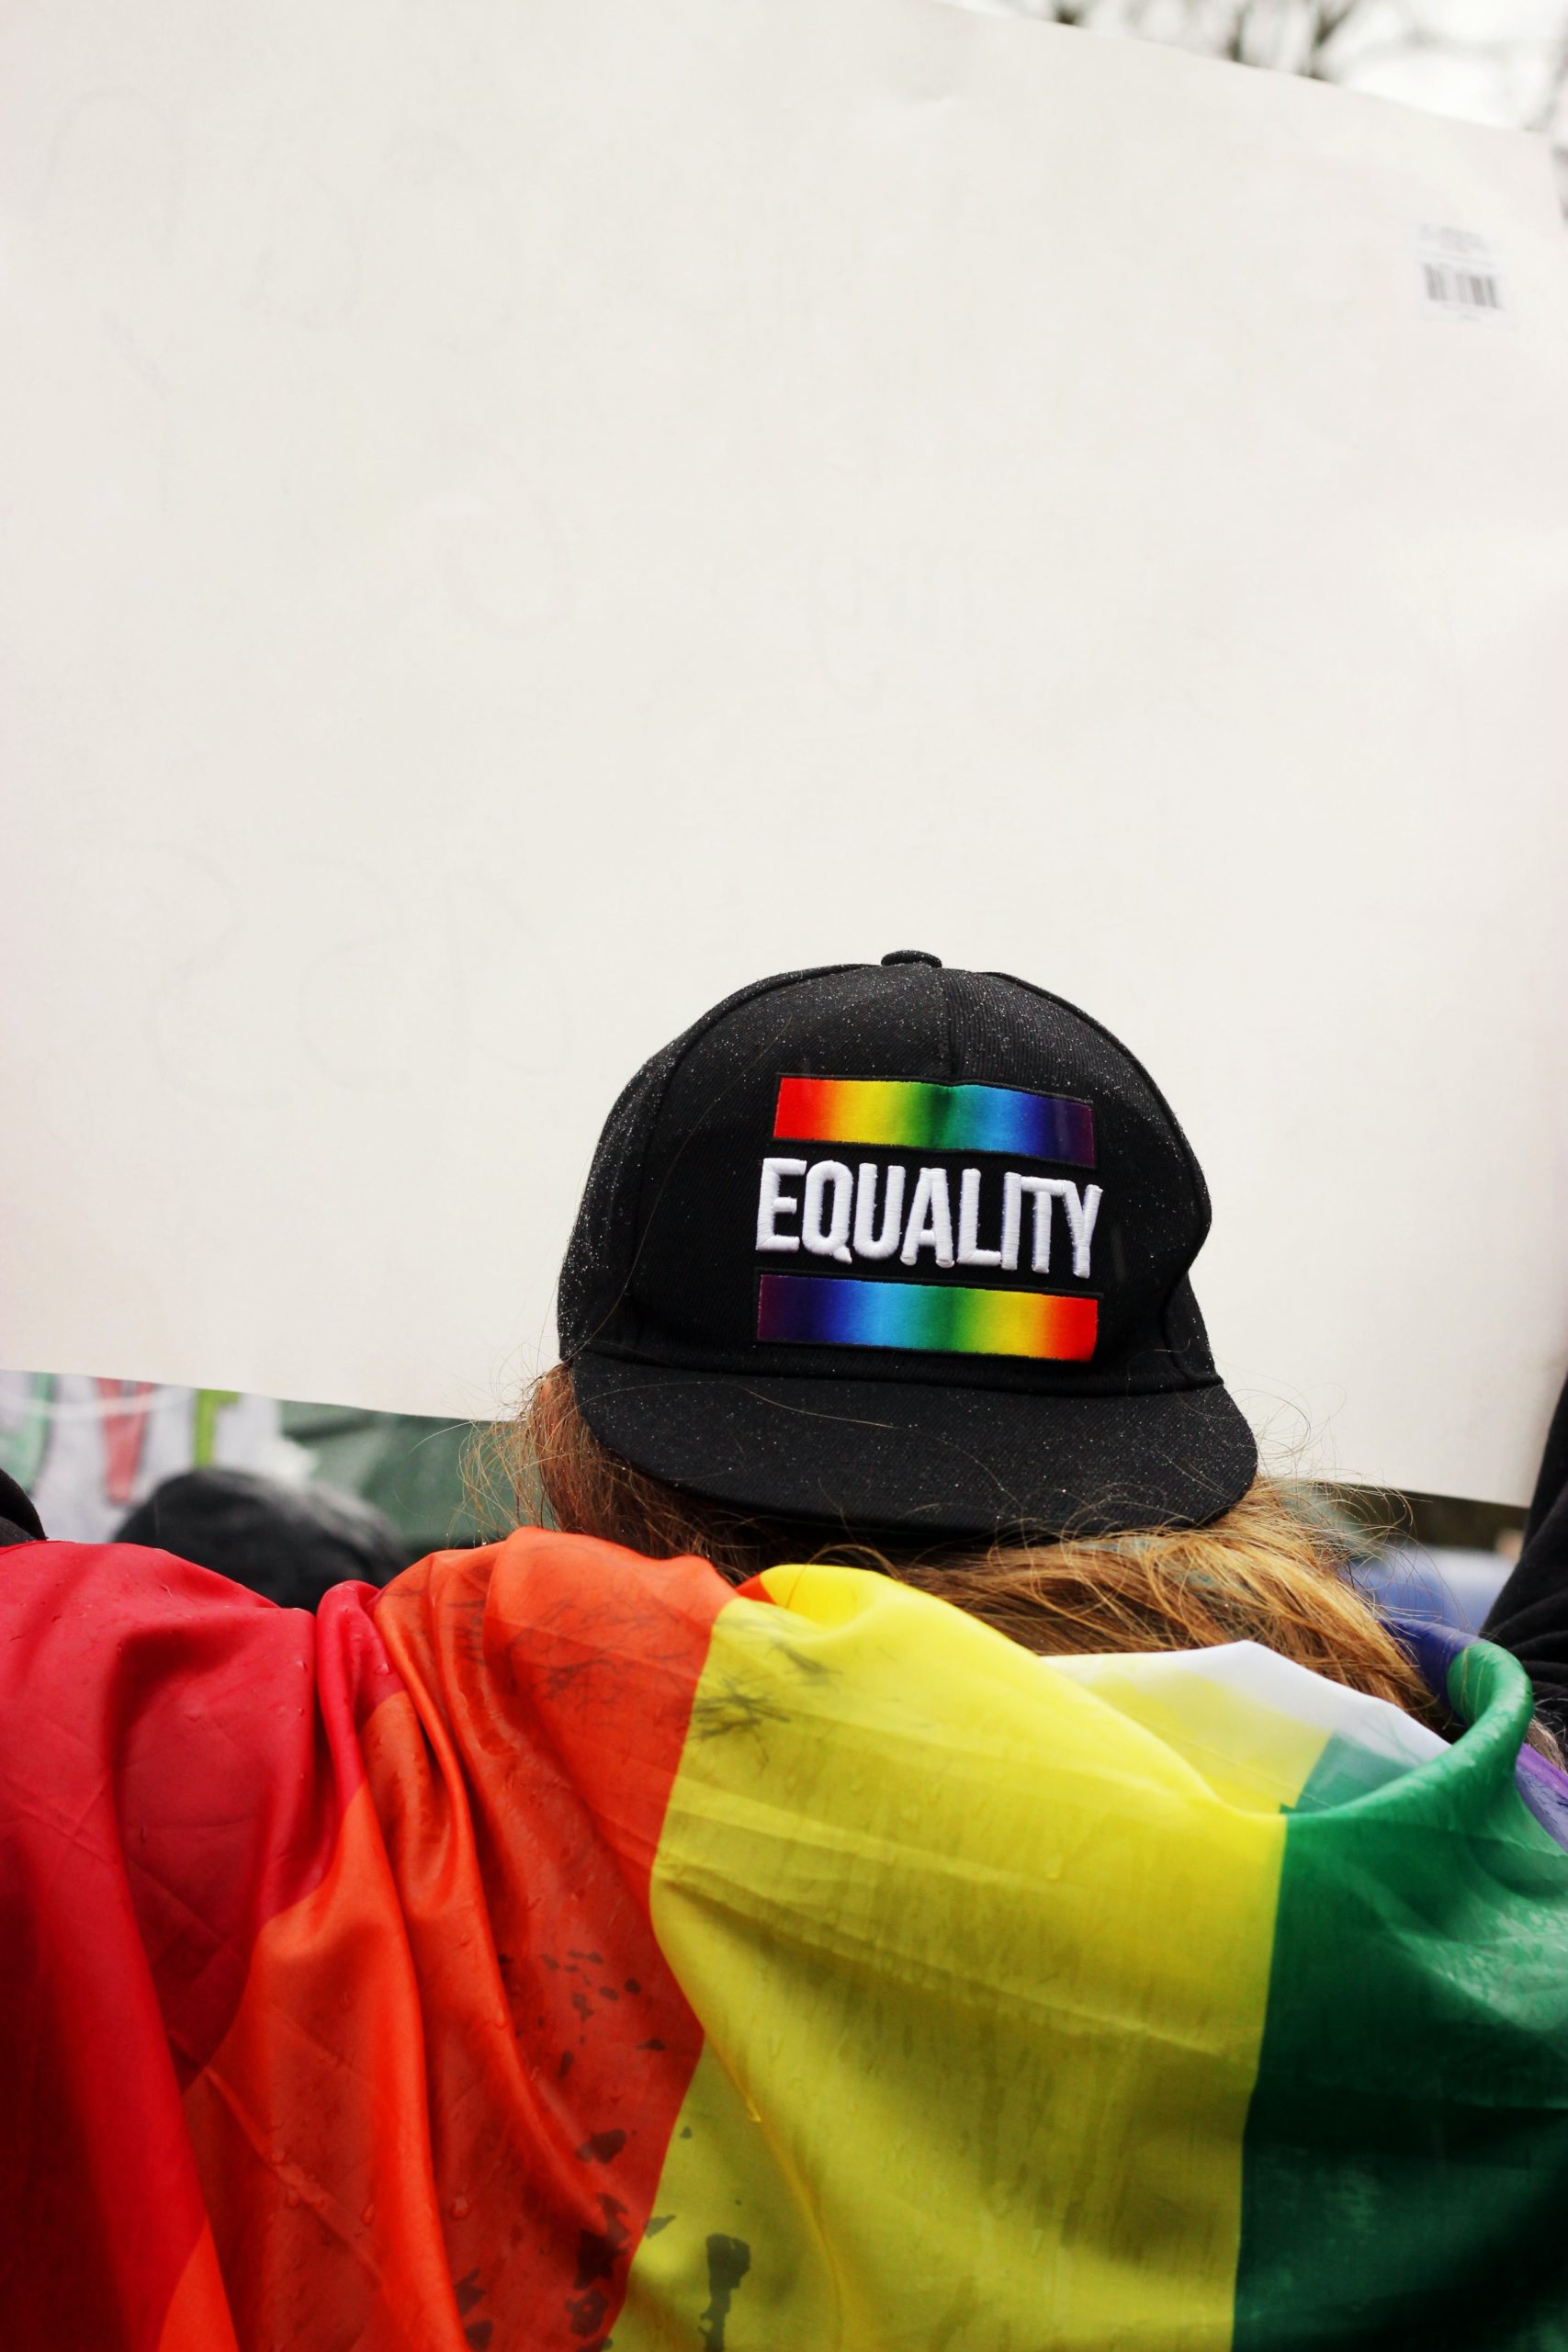 A person wearing a cap with the word equality written on it.